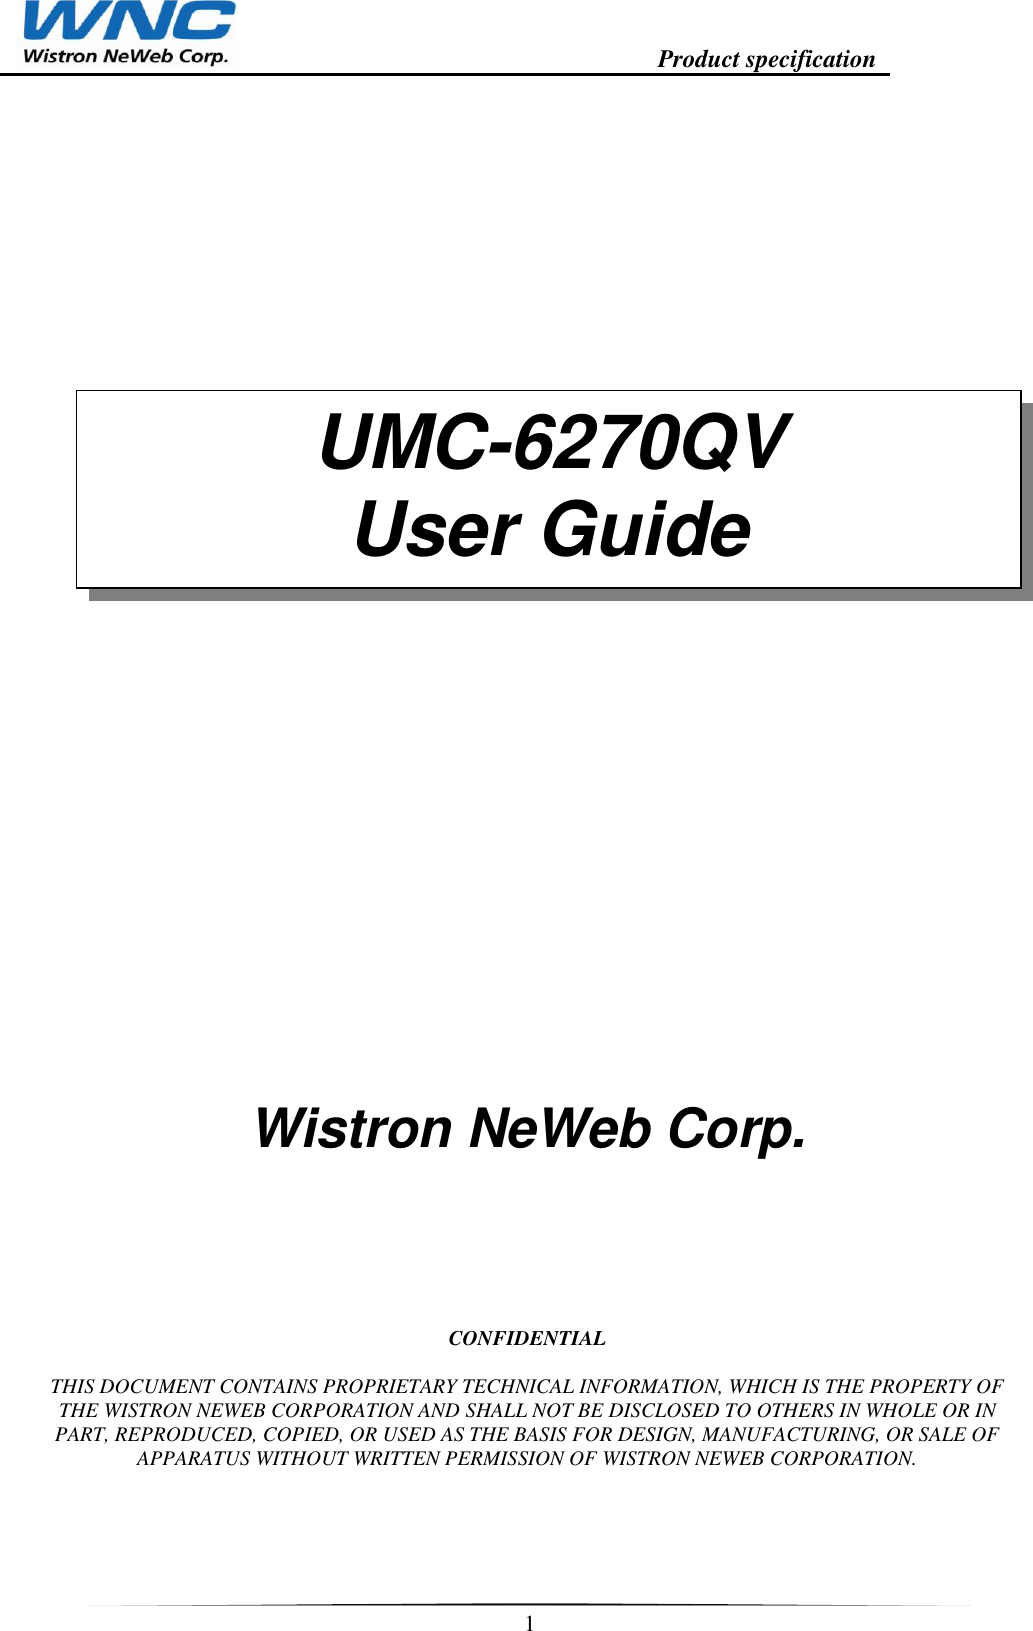                                                                    Product specification    1    Wistron NeWeb Corp.          CONFIDENTIAL  THIS DOCUMENT CONTAINS PROPRIETARY TECHNICAL INFORMATION, WHICH IS THE PROPERTY OF THE WISTRON NEWEB CORPORATION AND SHALL NOT BE DISCLOSED TO OTHERS IN WHOLE OR IN PART, REPRODUCED, COPIED, OR USED AS THE BASIS FOR DESIGN, MANUFACTURING, OR SALE OF APPARATUS WITHOUT WRITTEN PERMISSION OF WISTRON NEWEB CORPORATION.  UMC-6270QV User Guide 